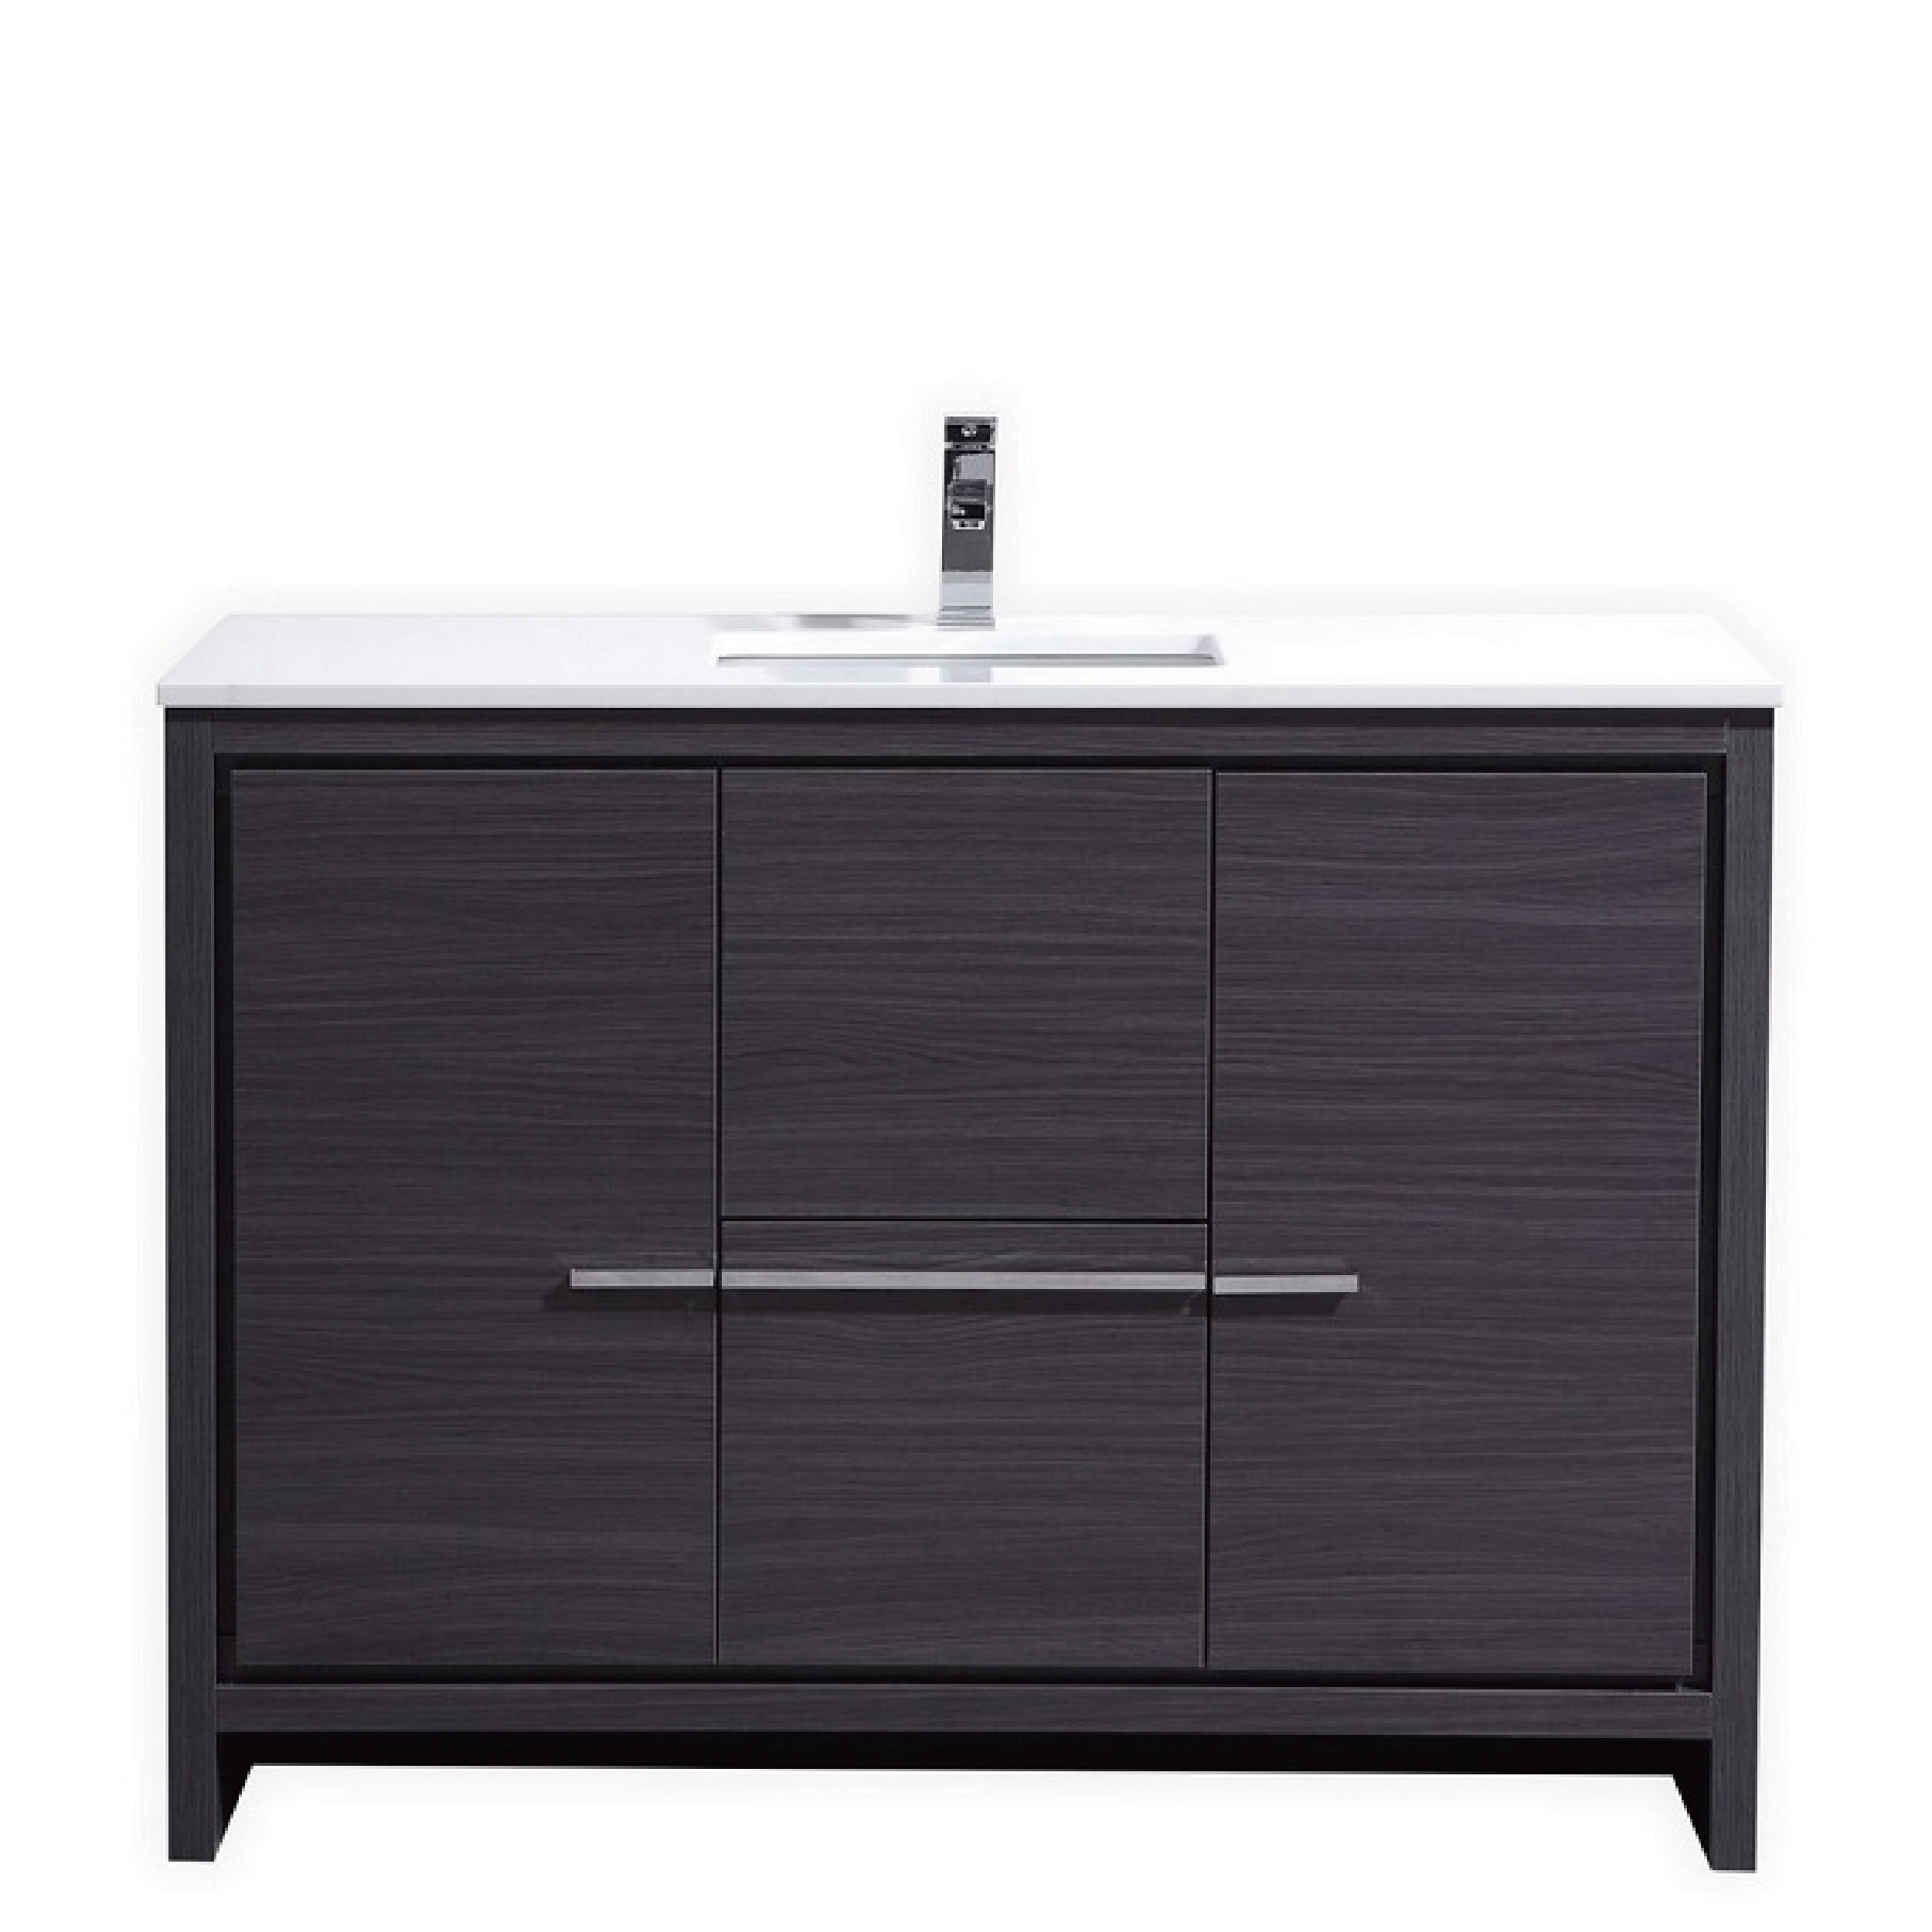 120CM Modern Floor Standing Bathroom Cabinet Furniture Lacquer Finish White And Walnut Color With Two Doors And Two Drawers